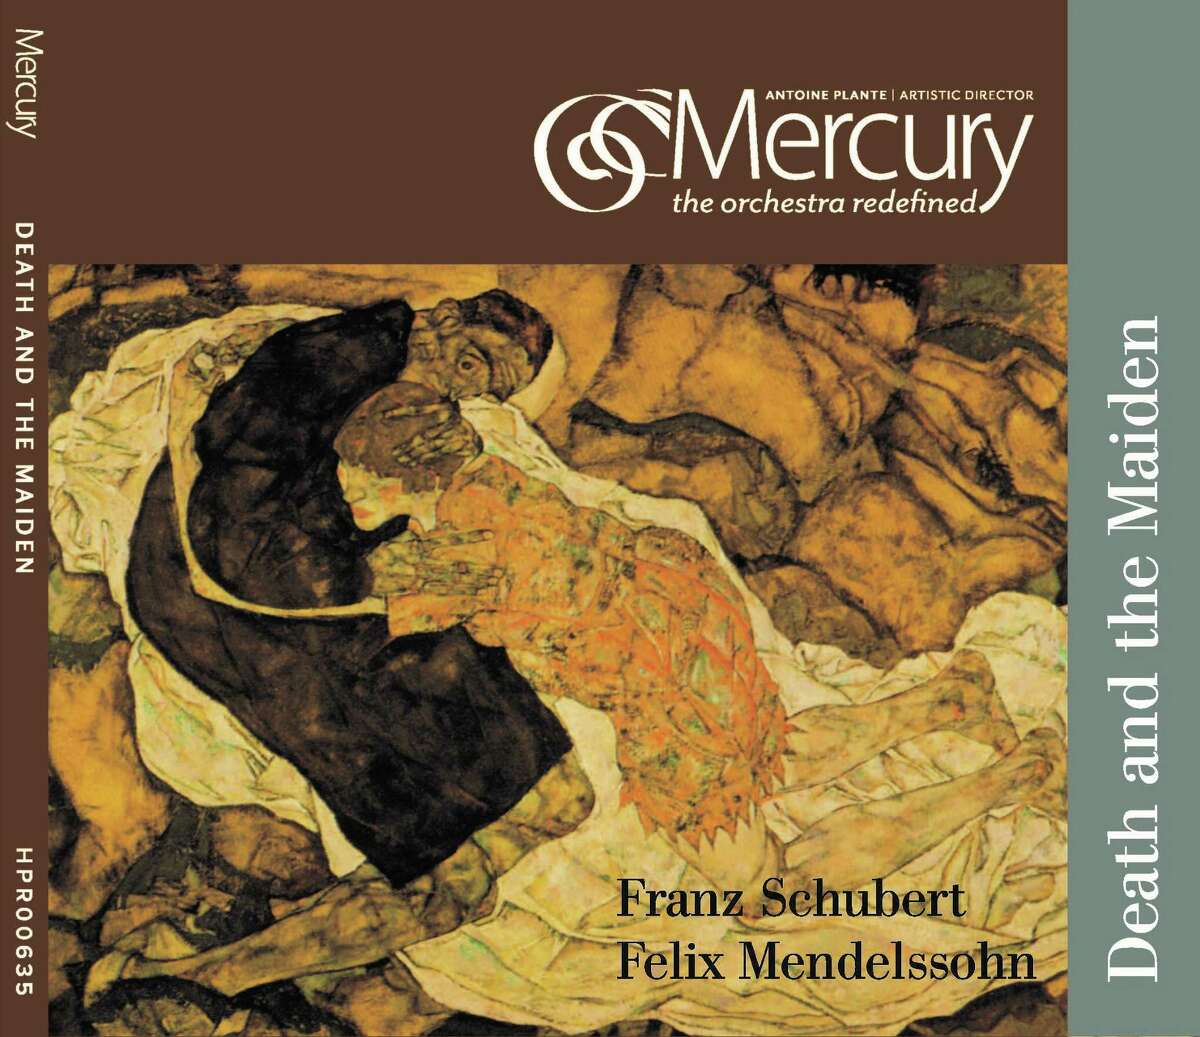 The Mercury period-instrument orchestra performs works by Franz Schubert and Felix Mendelssohn on its new CD.